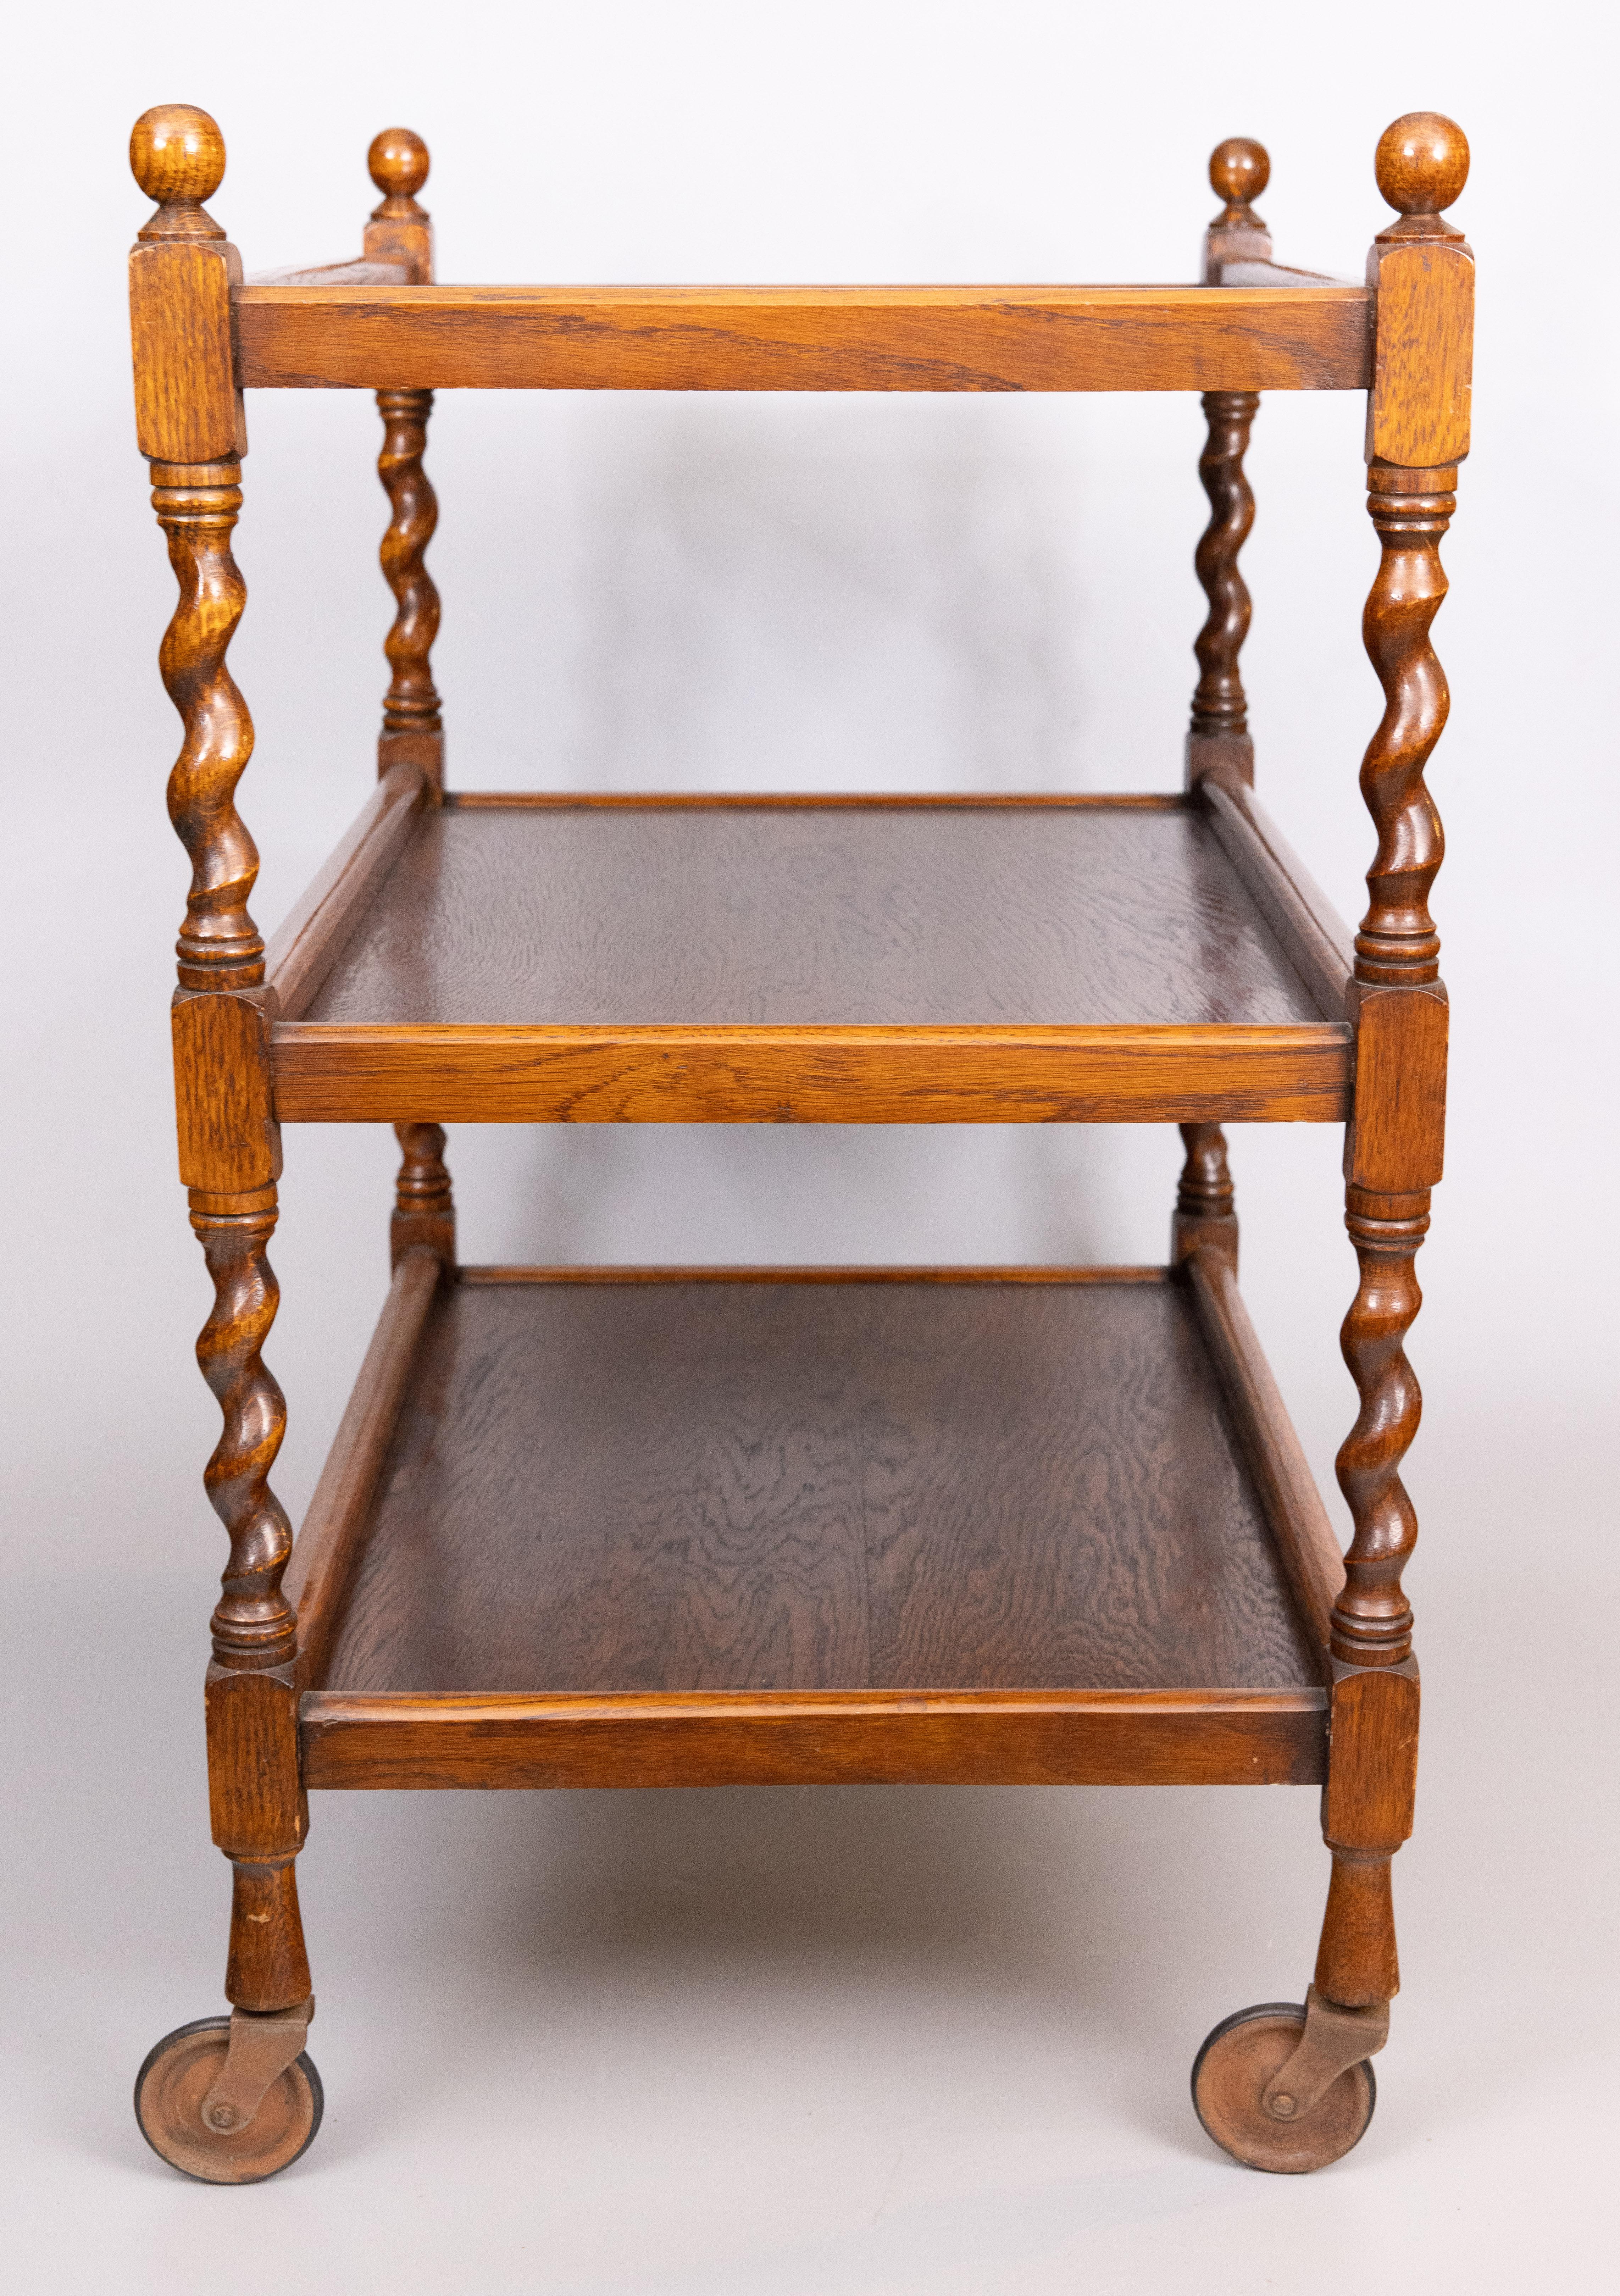 Classic antique English oak barley twist trolley cart with three tiers and original casters, circa 1920. Perfect for a beverage/bar cart or side table.